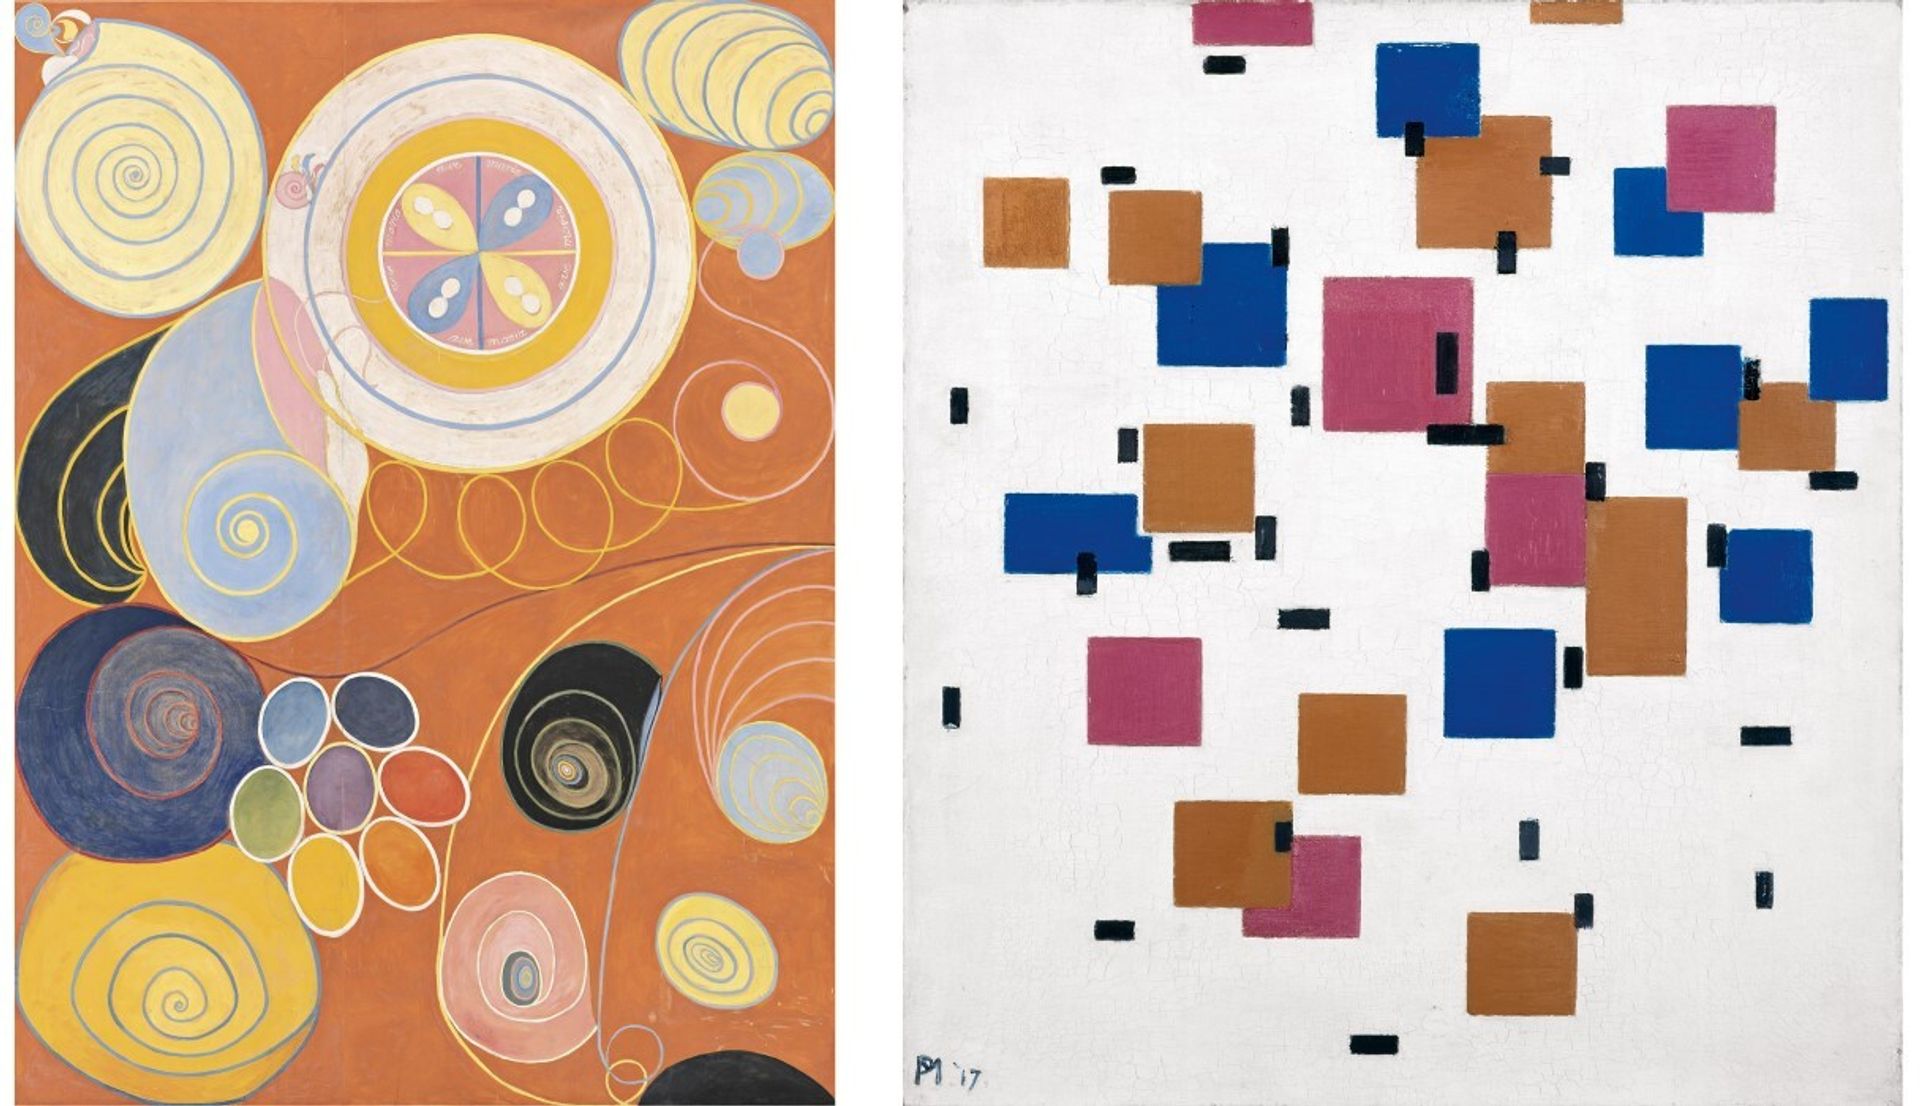 Hilma af Klint,The Ten Largest, Group IV, No. 3, Youth (1907) Courtesy of The Hilma af Klint Foundation [left] and Piet Mondrian, Composition in colour A (1917) Collection Kröller-Müller Museum, Otterlo, the Netherlands [right].